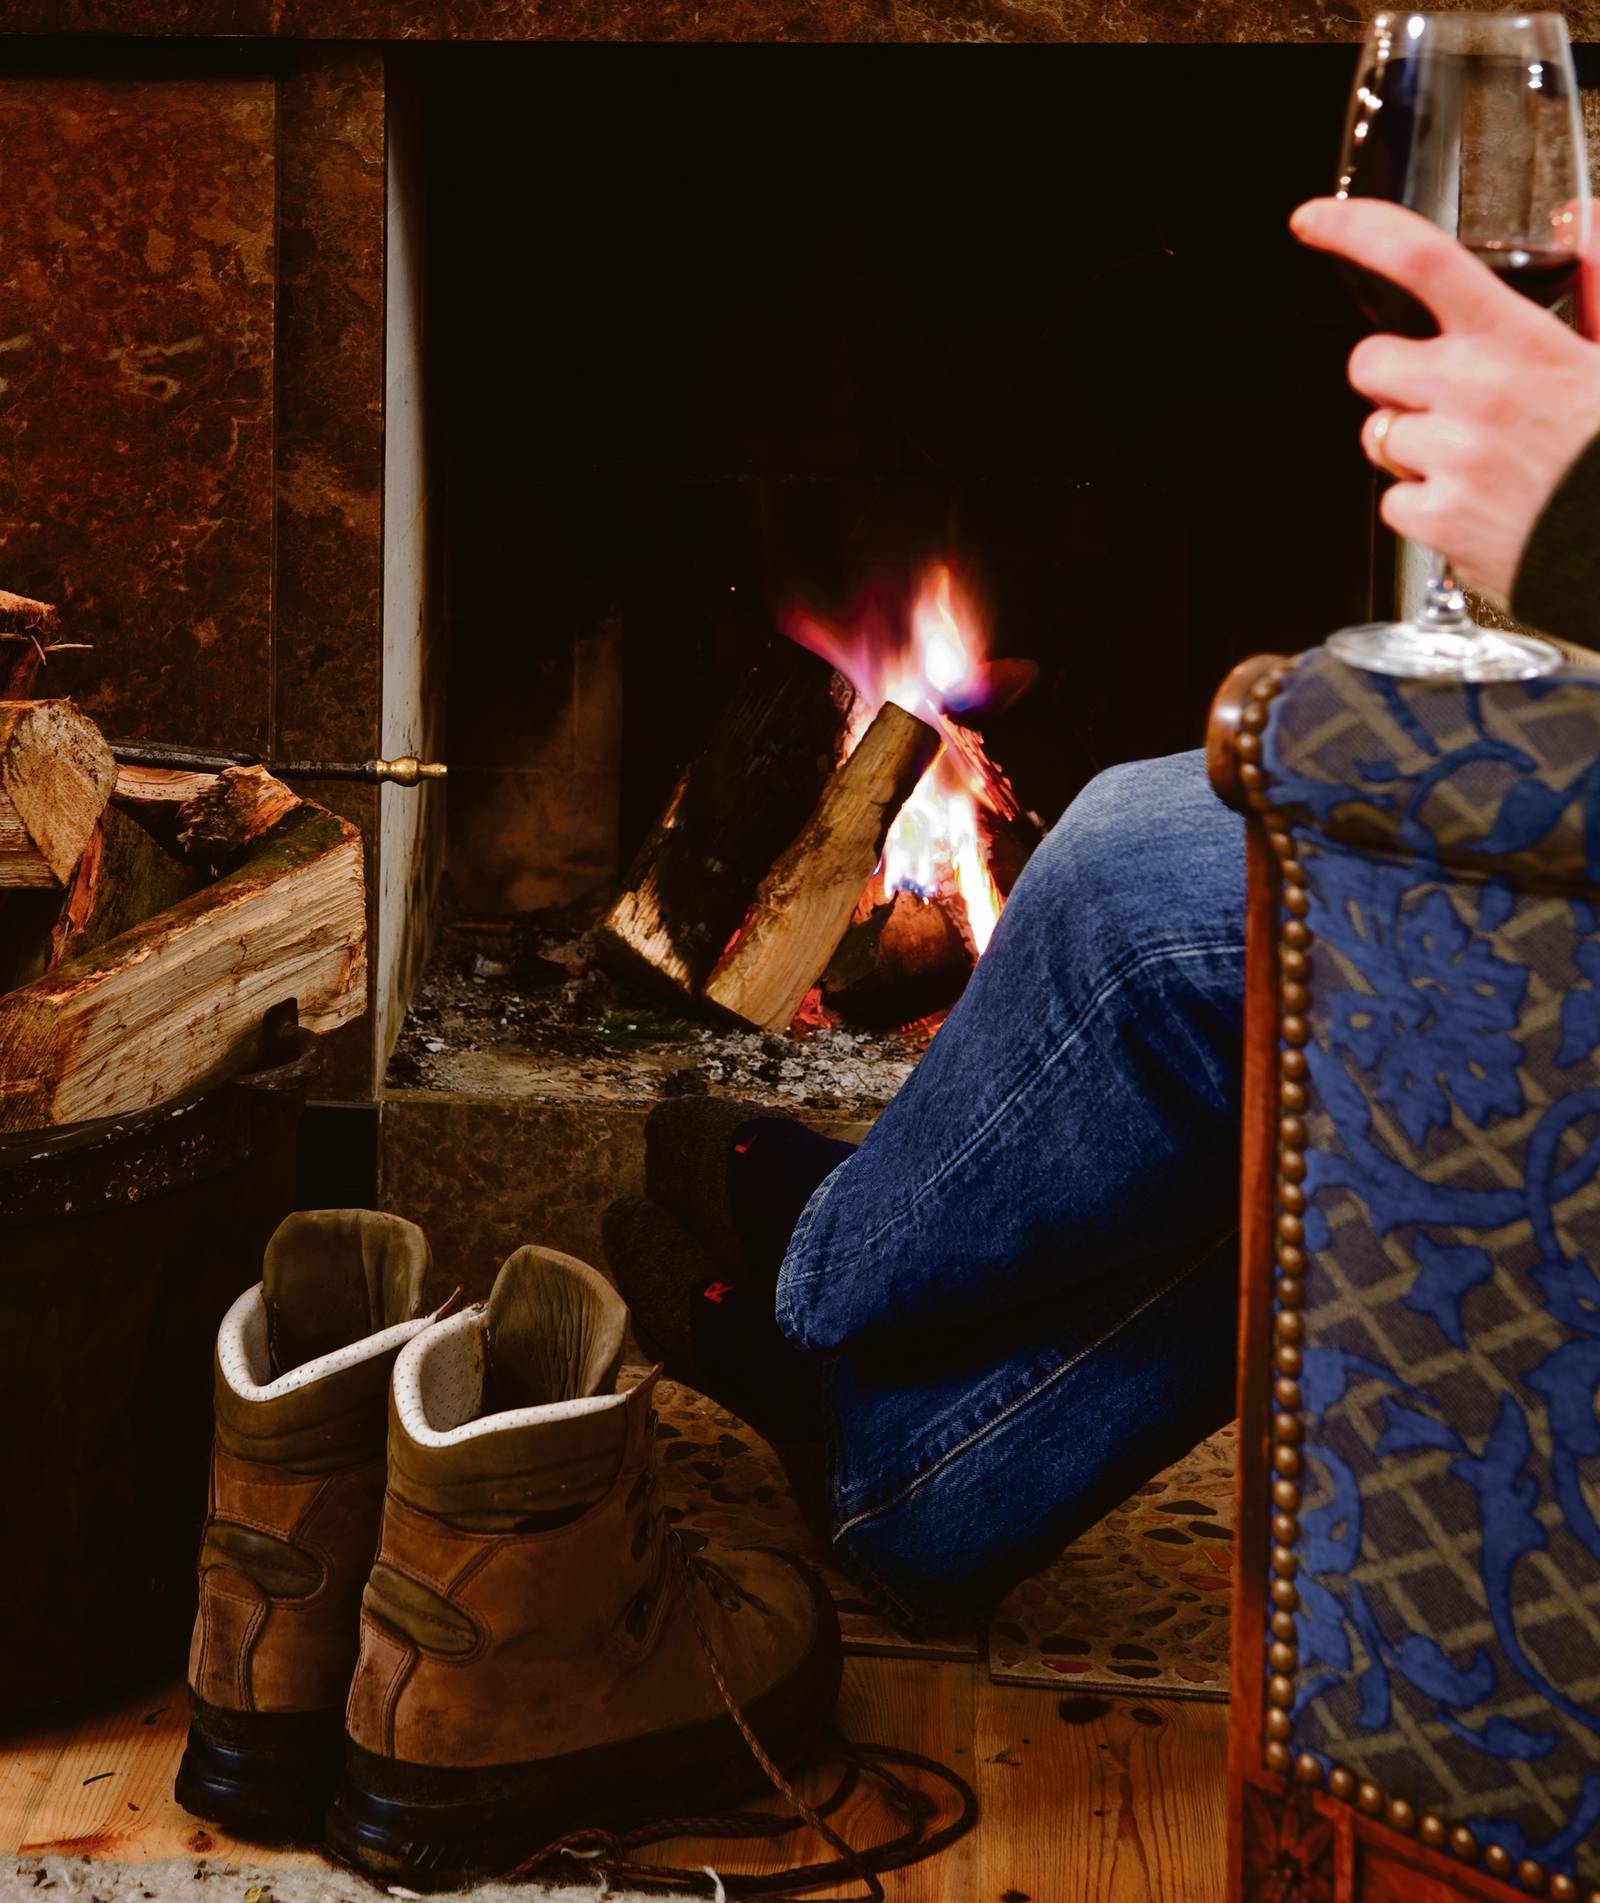 Man relaxing with a glass of red wine by the fireplace after a long hike; his boots off, next to him, warming up